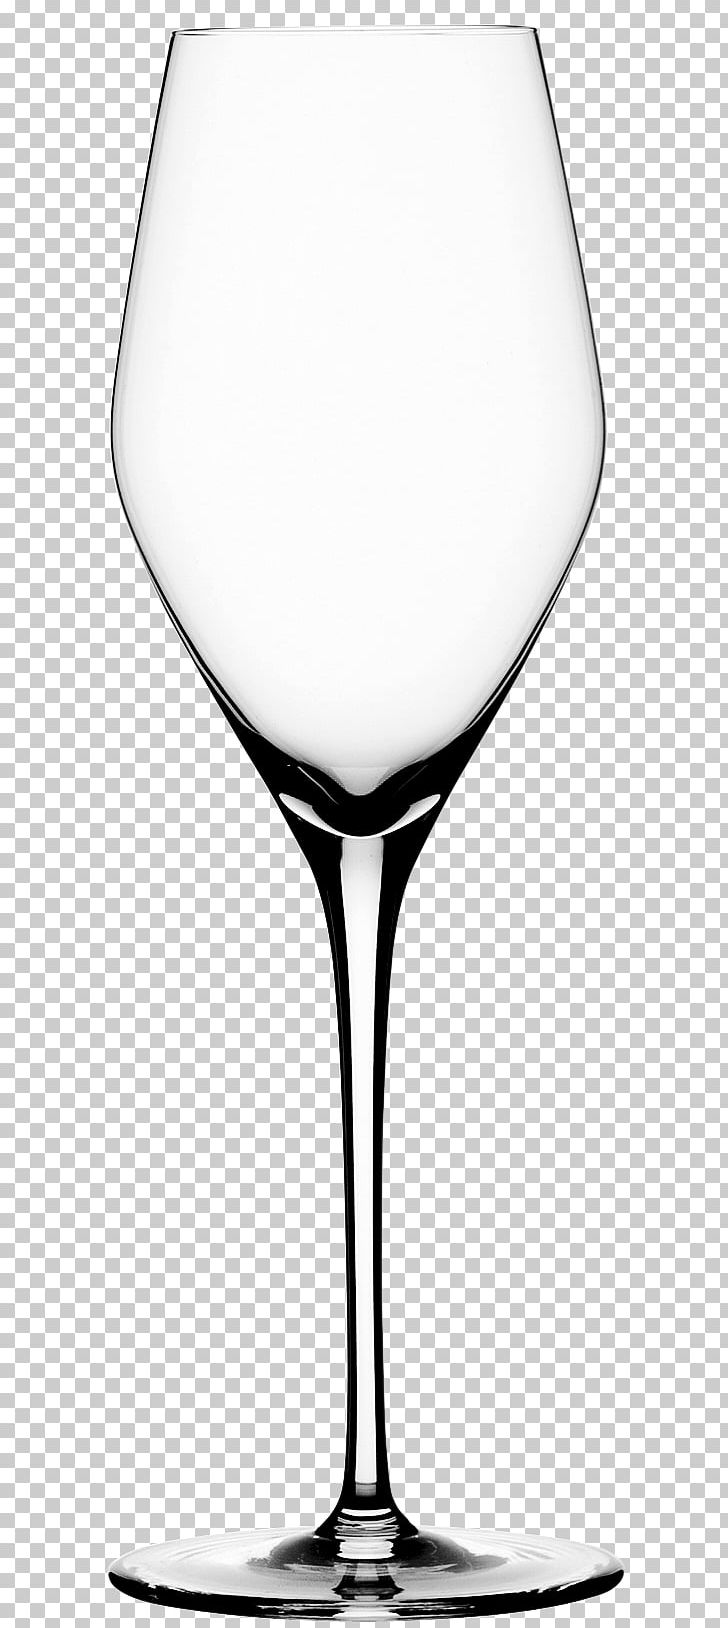 Champagne Glass Wine Spiegelau Prosecco PNG, Clipart, Beer Glasses, Black And White, Bordeaux Wine, Champagne, Champagne Stemware Free PNG Download